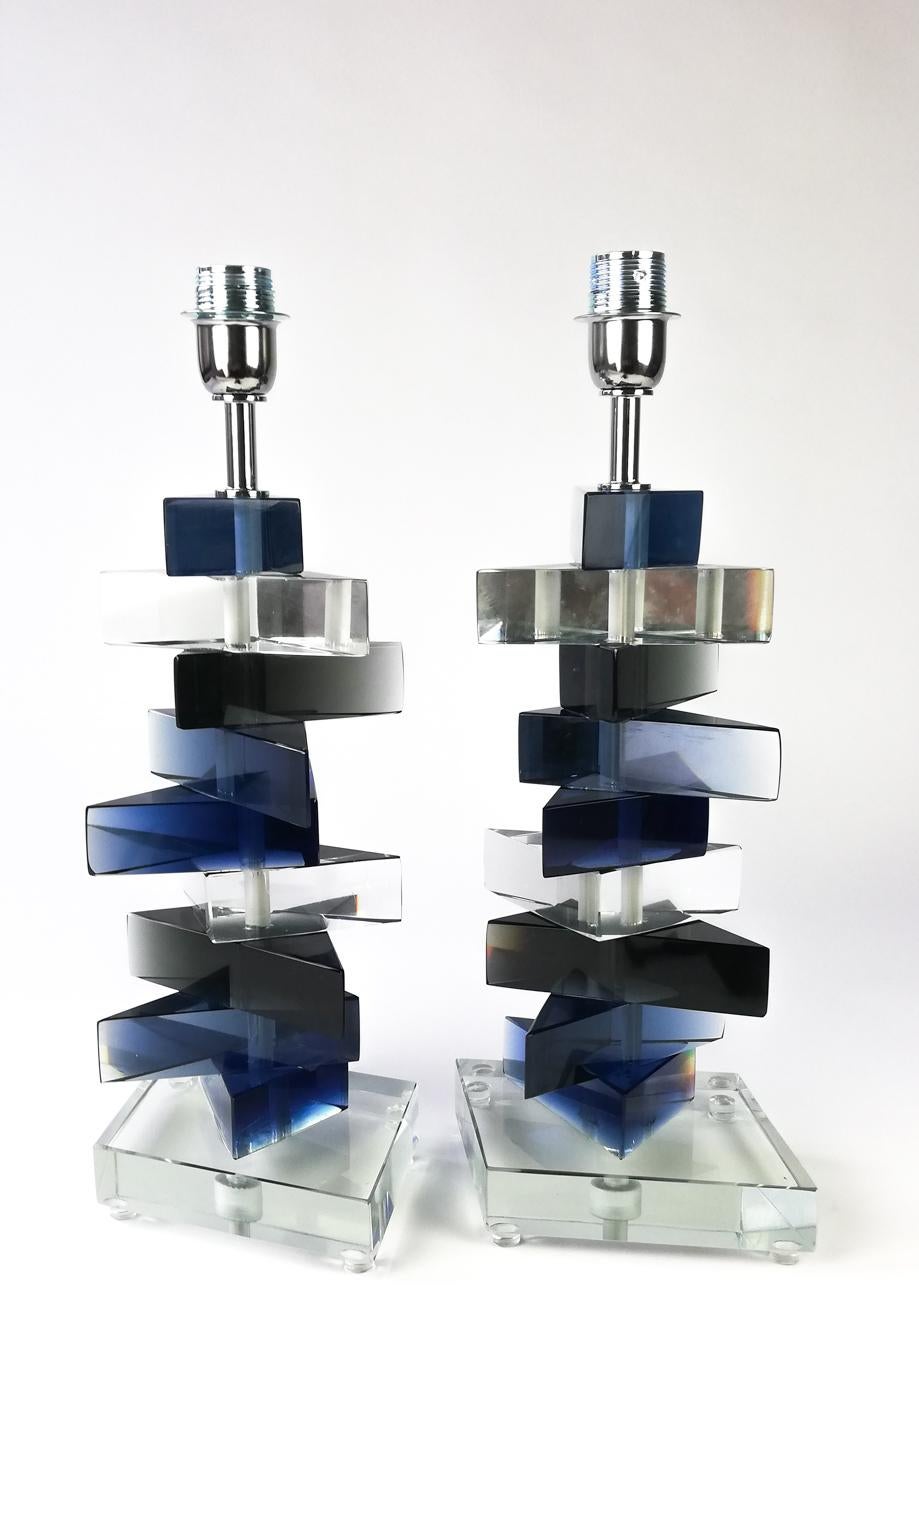 In 1985 Alberto Donà created a fabulous lamp with this product. He adds glass prisms of different colors, blue, grey and crystal.
The results are a fantastic table lamp that can reflect the light creating different and beautiful shades.
Every